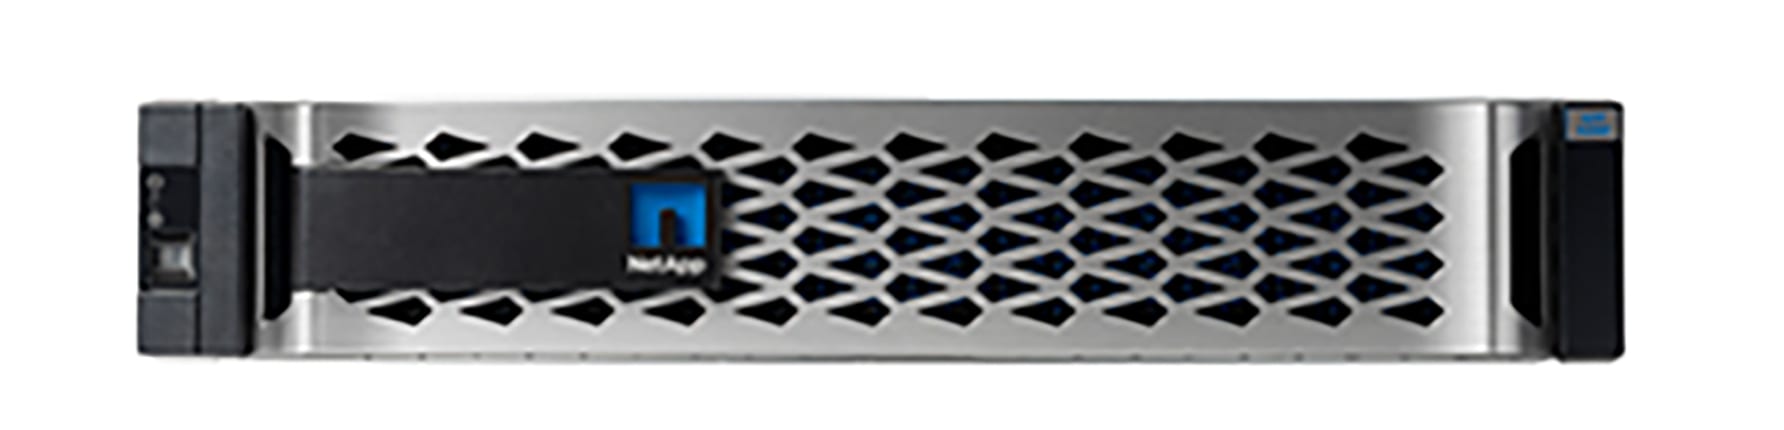 NetApp AFF C190 Flash Array Storage System with 12x960GB NVMe RJ-45 Solid State Drive